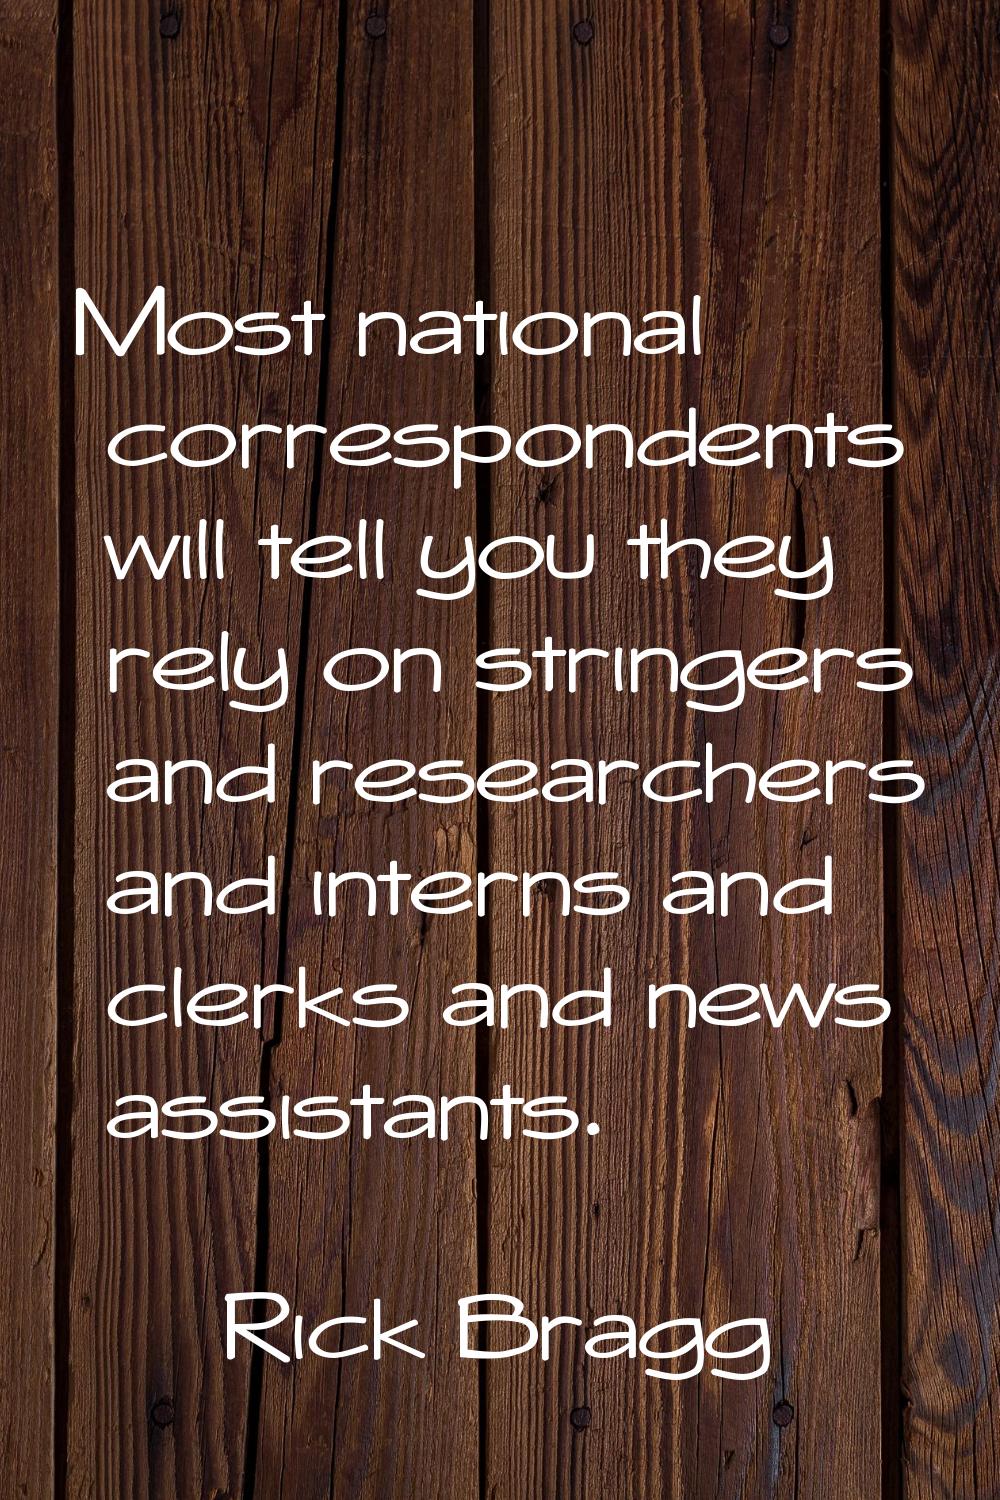 Most national correspondents will tell you they rely on stringers and researchers and interns and c